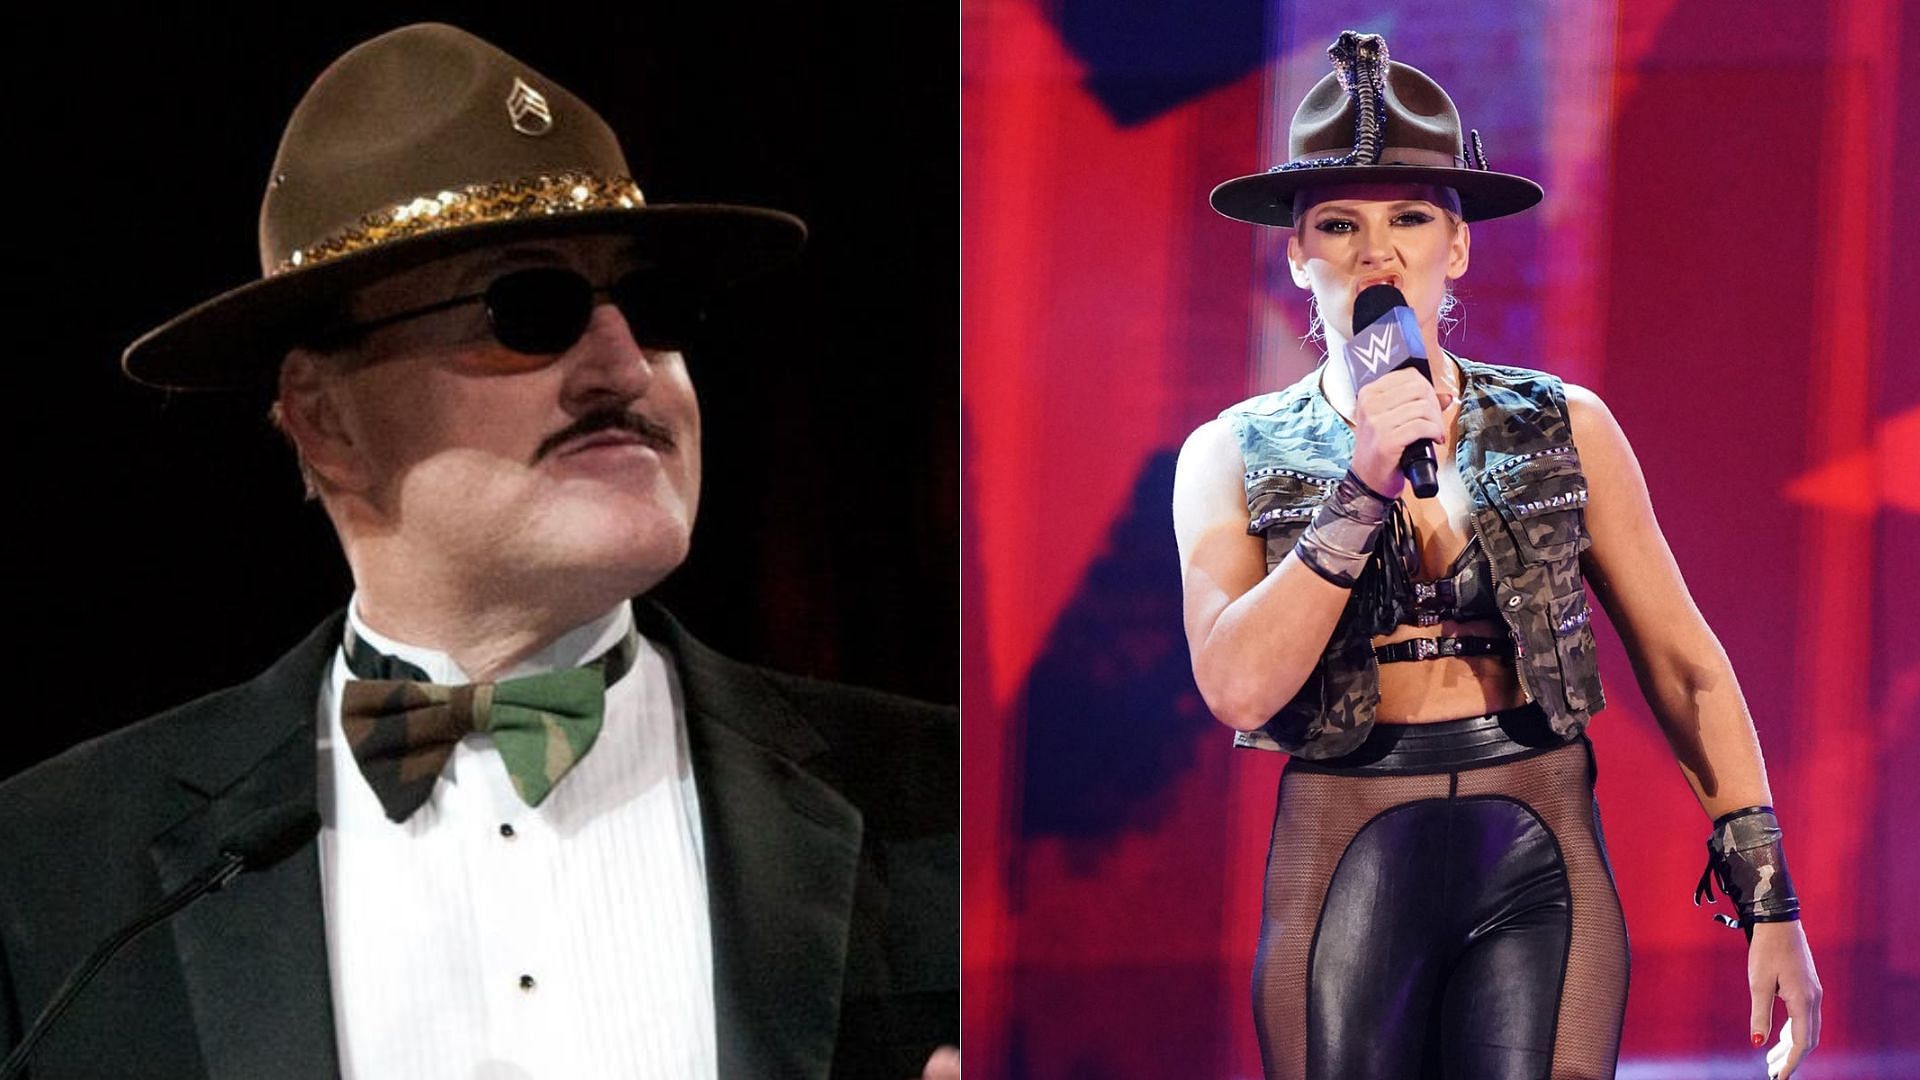 Sgt. Slaughter used the Cobra Clutch before Lacey Evans